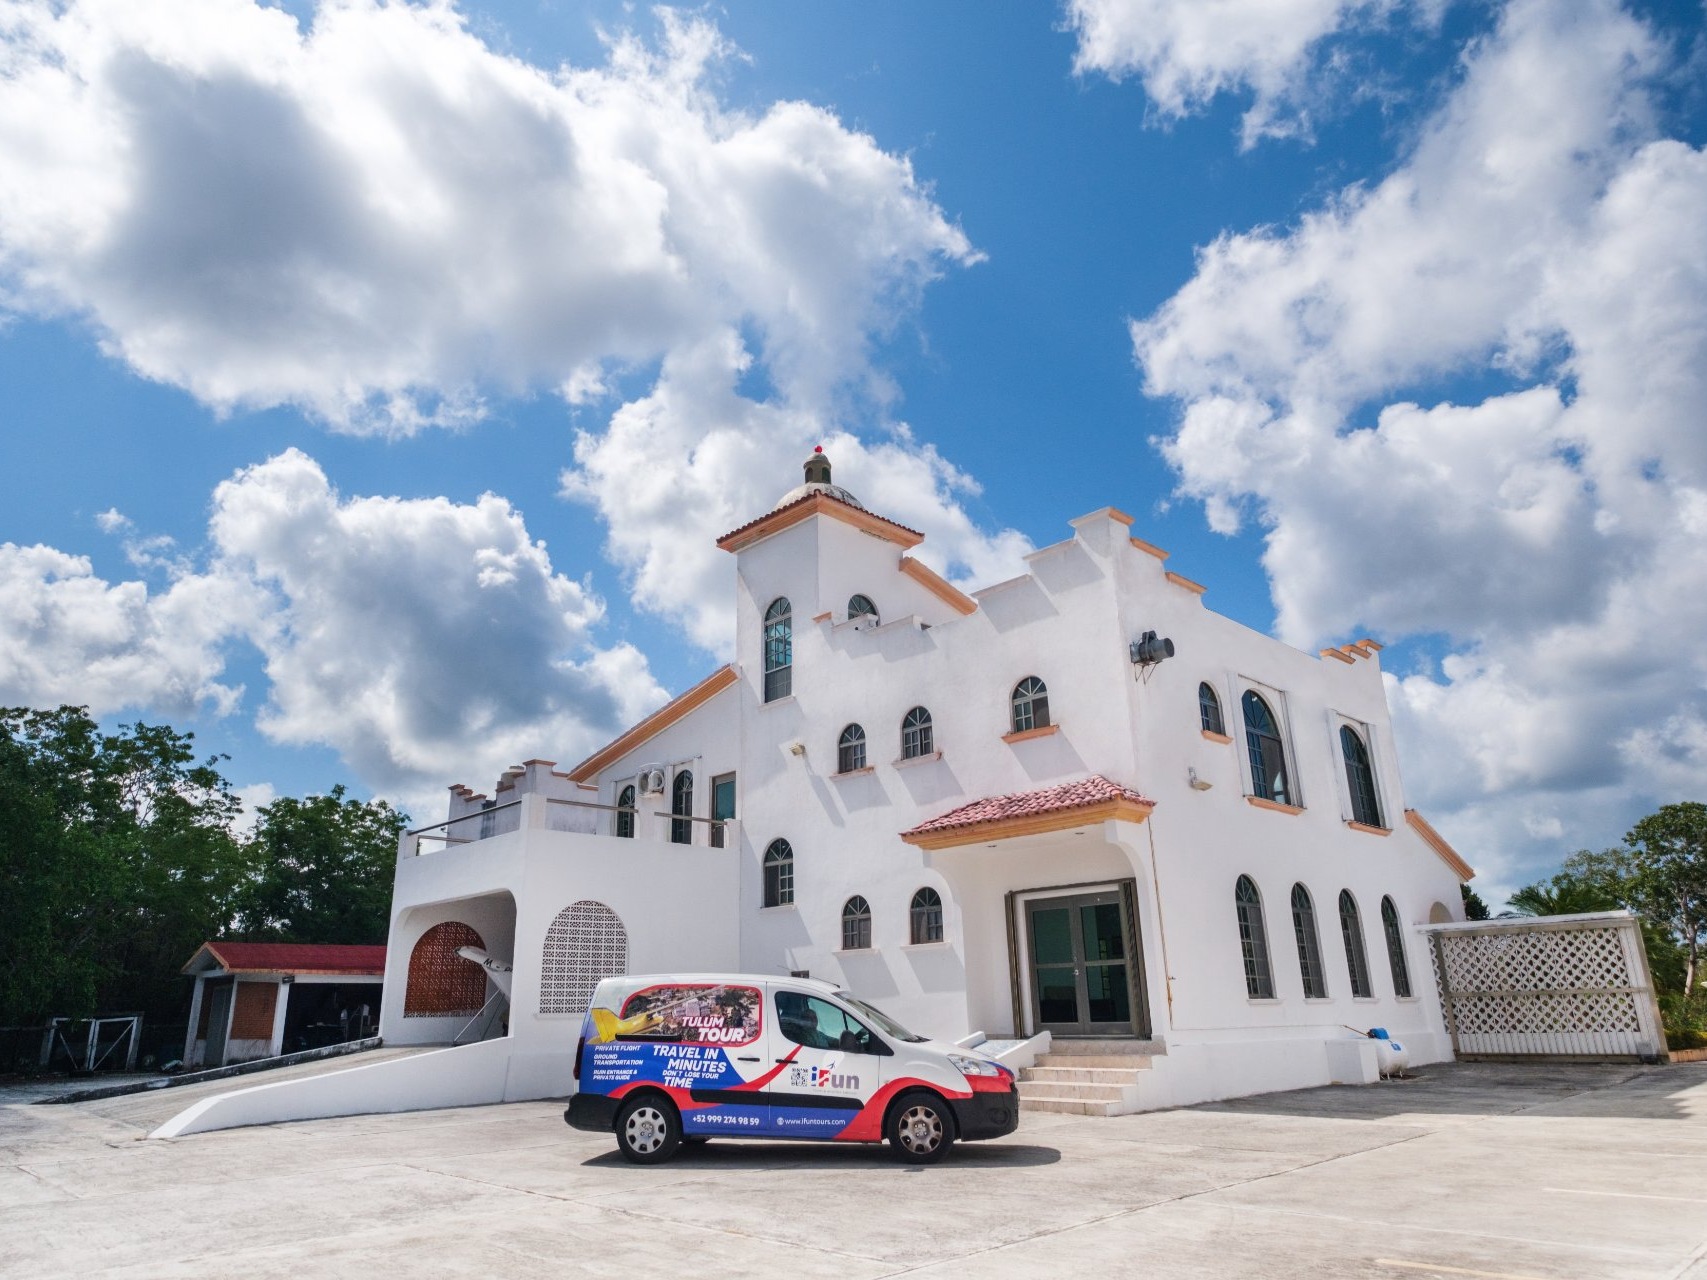 Private Taxi in Cozumel CLICK ON THE PICTURE FOR MORE